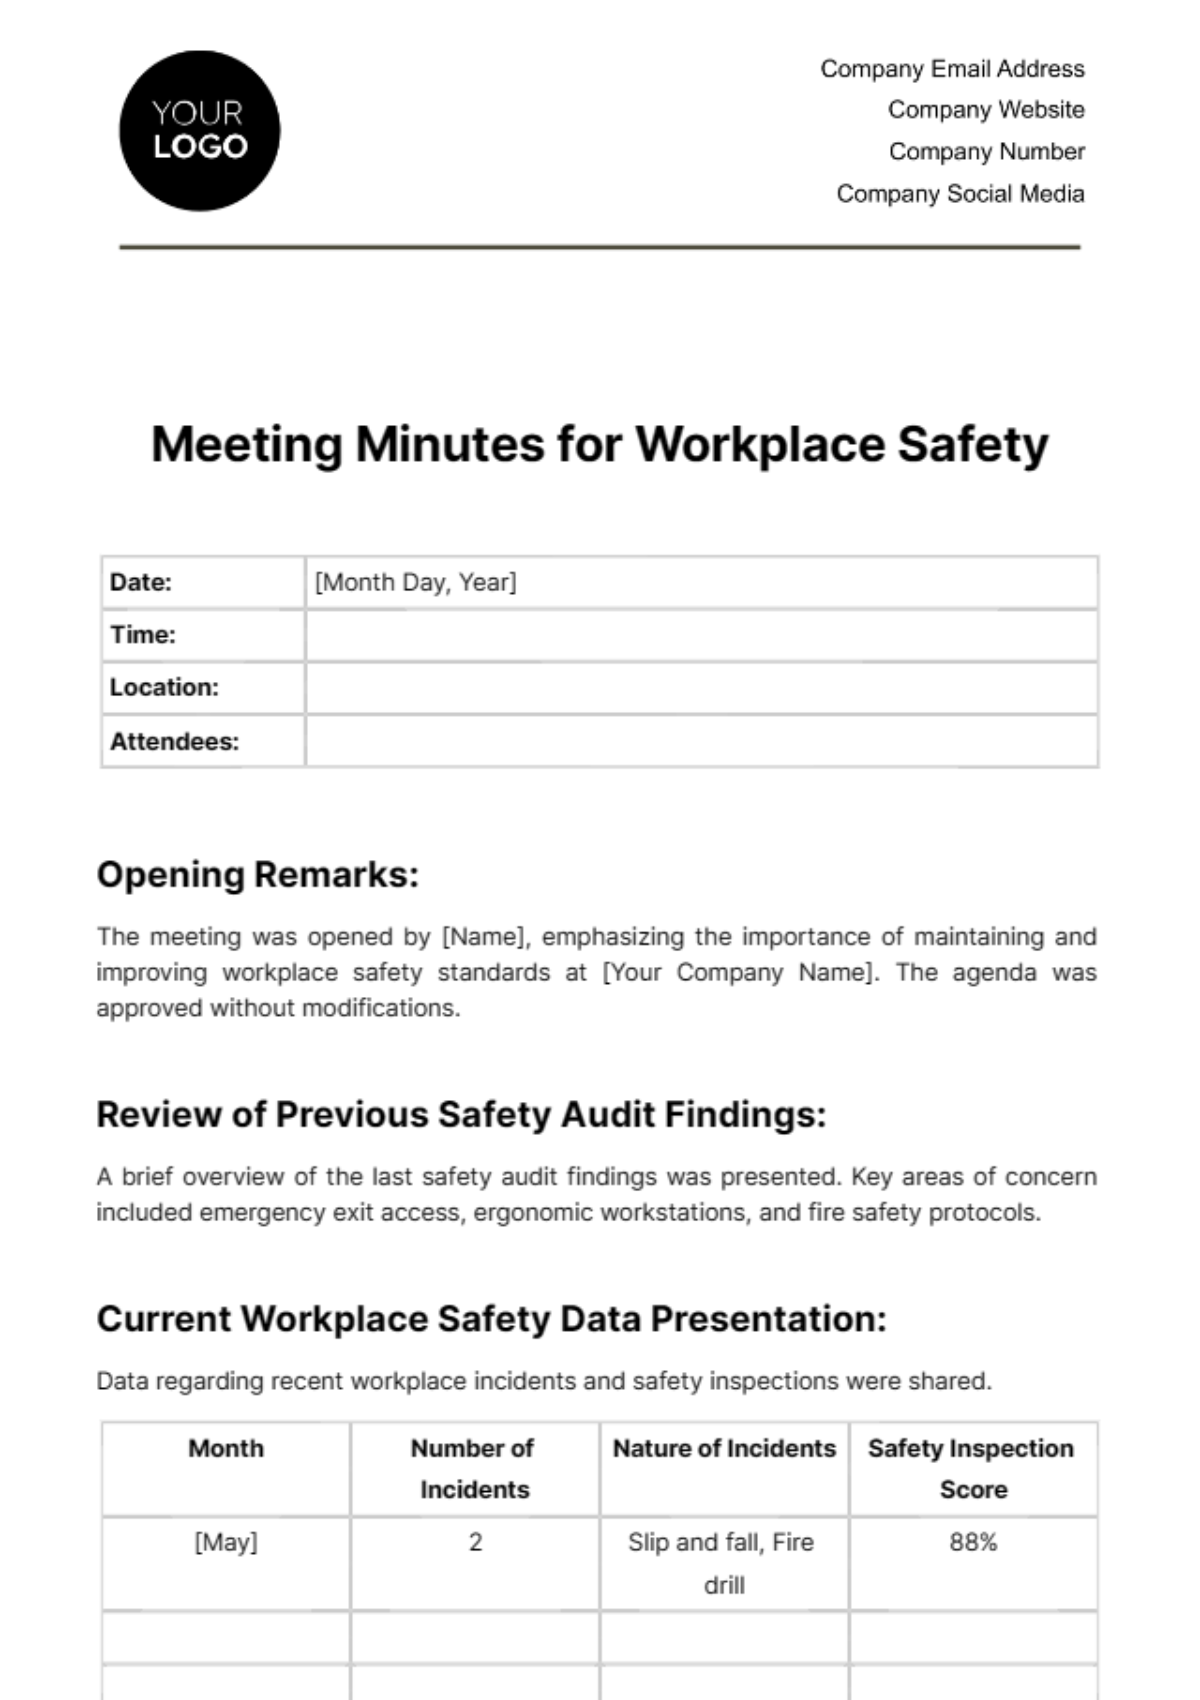 Meeting Minutes for Workplace Safety Template